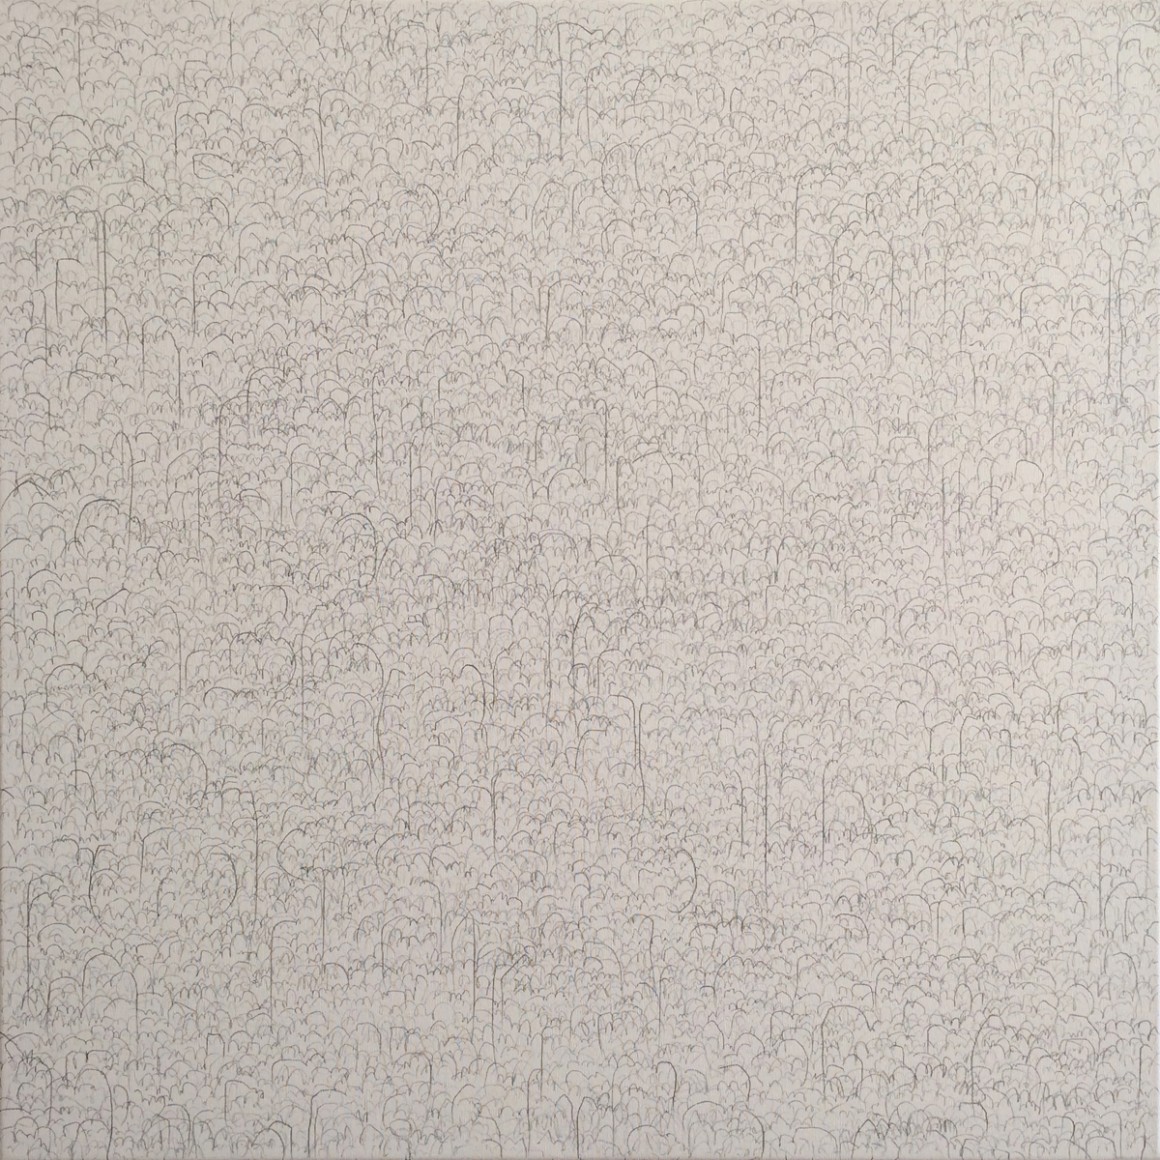 89964 seconds [paces] of drawing [walking] 2014_panel 2